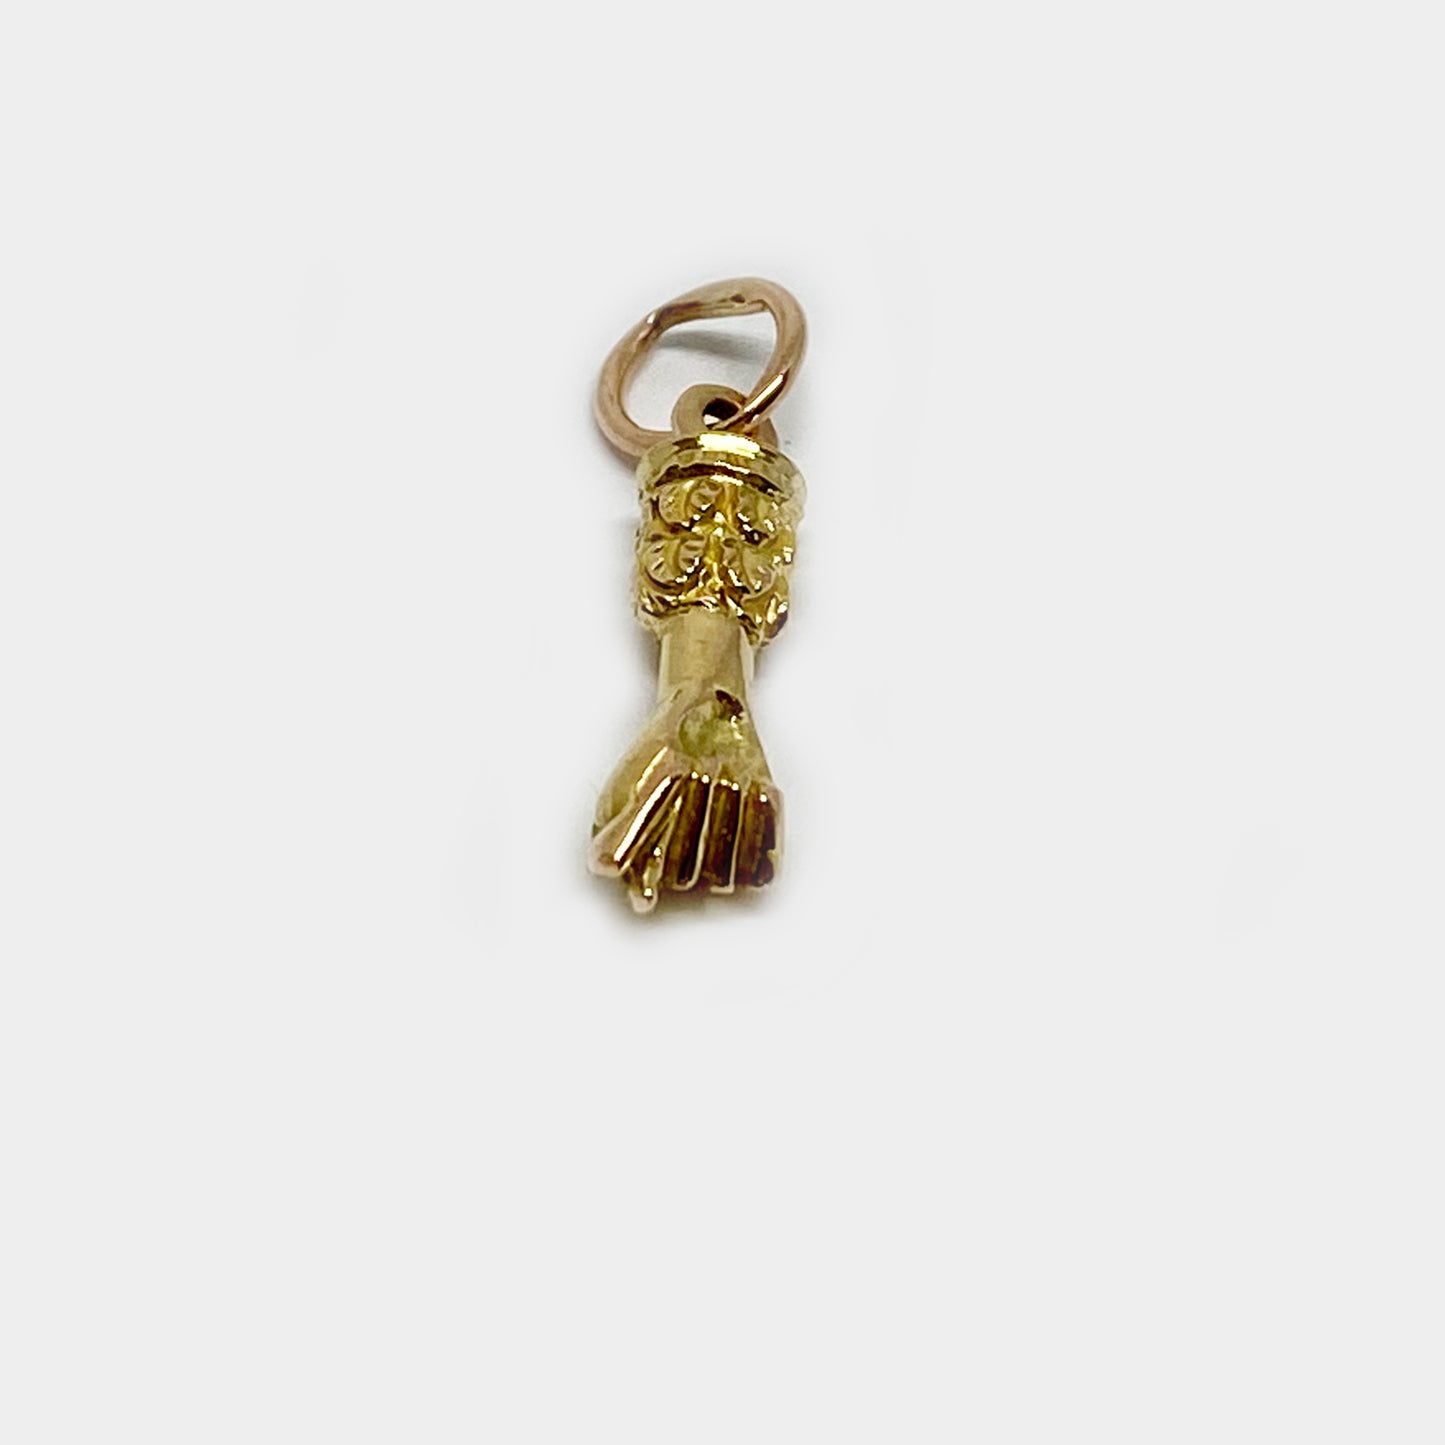 Antique 14k Gold Solid Figa Charm